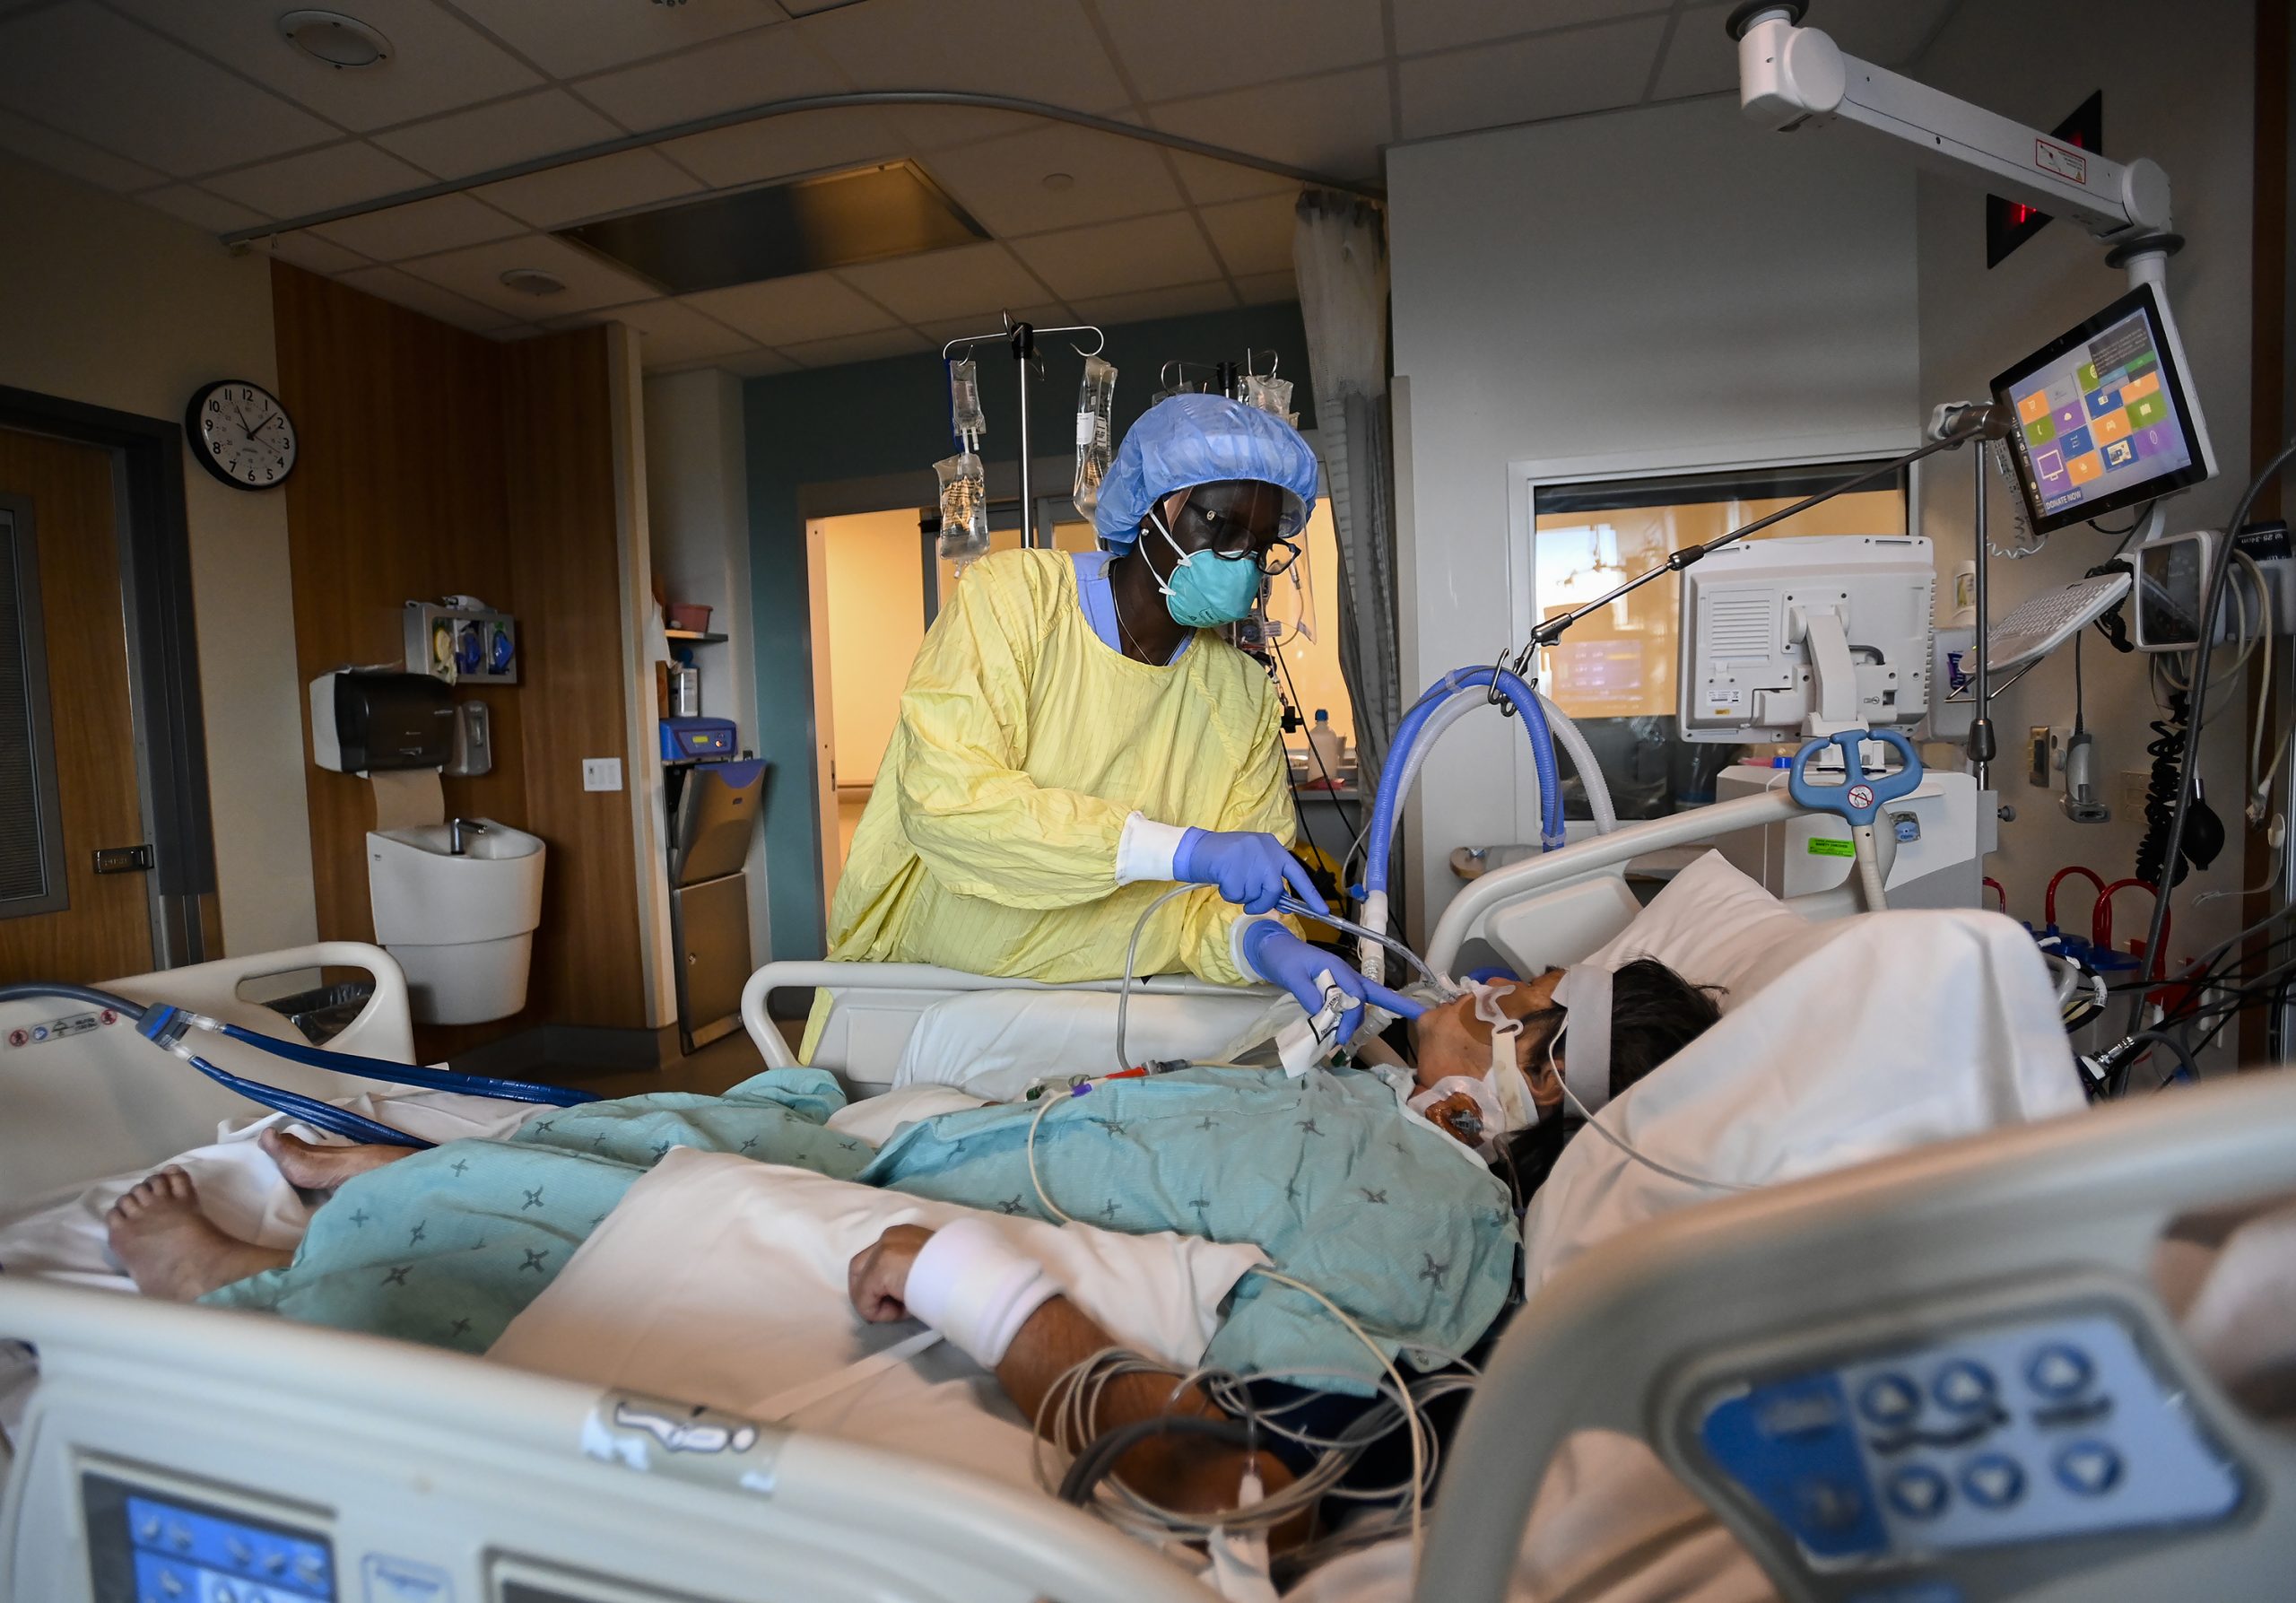 Maryland's COVID-19 hospitalizations fall below 500, first since October